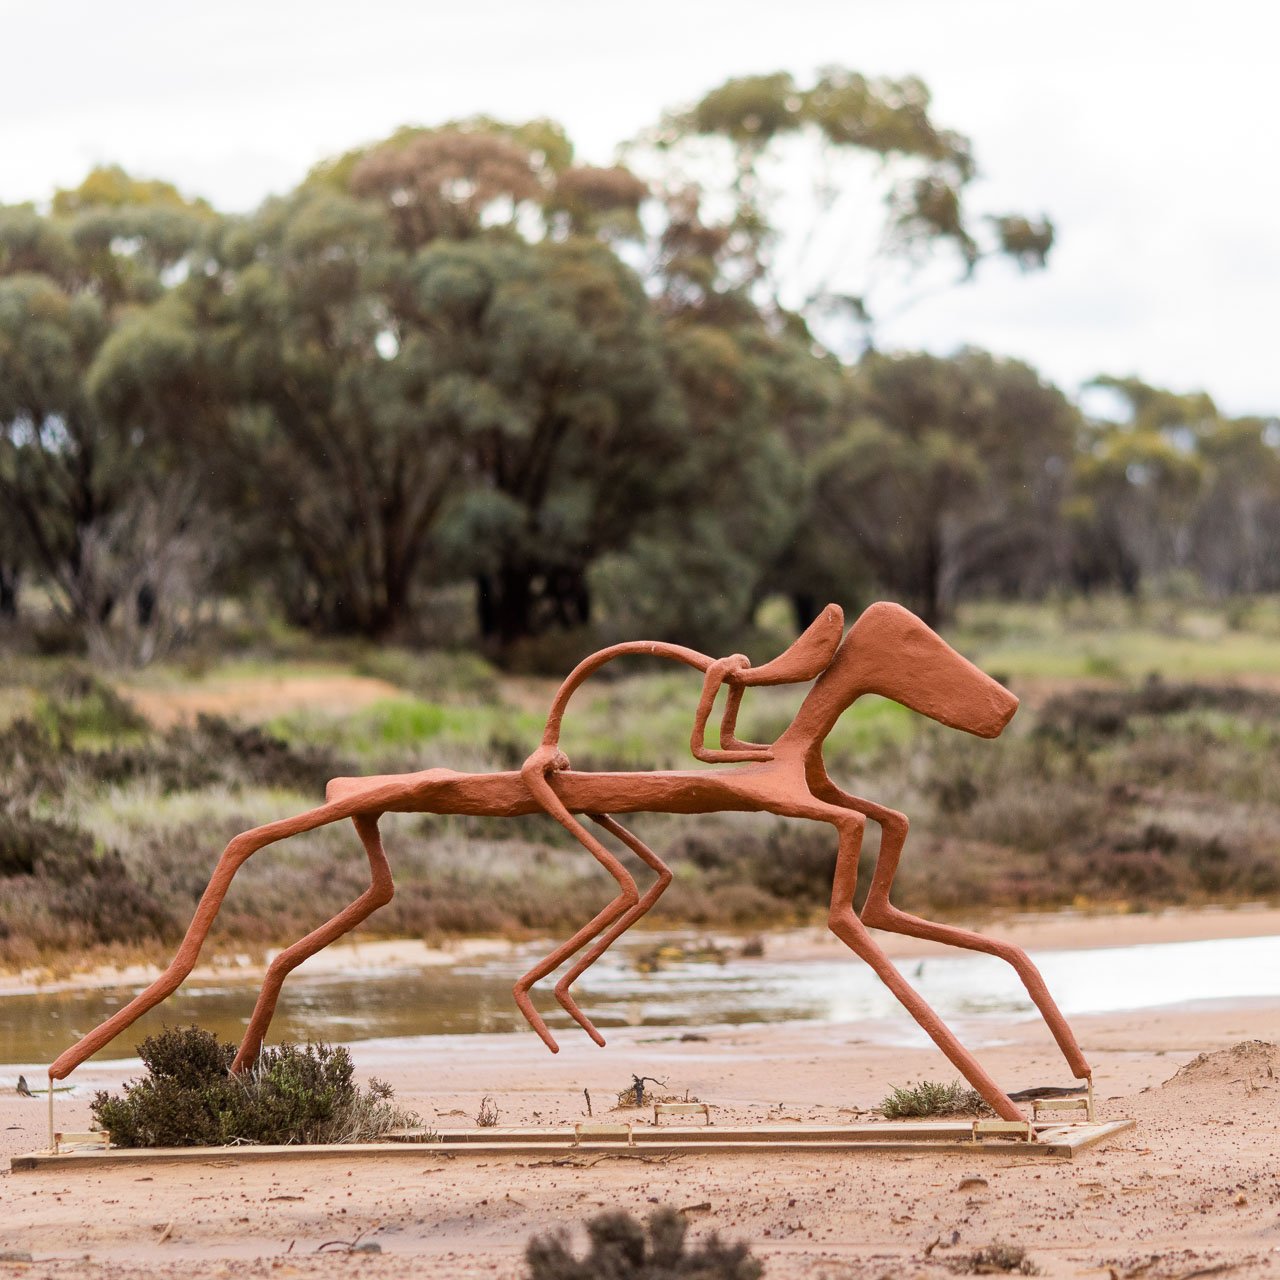 The Tin Horse Highway in Kulin features sculptures by both locals and professional artists